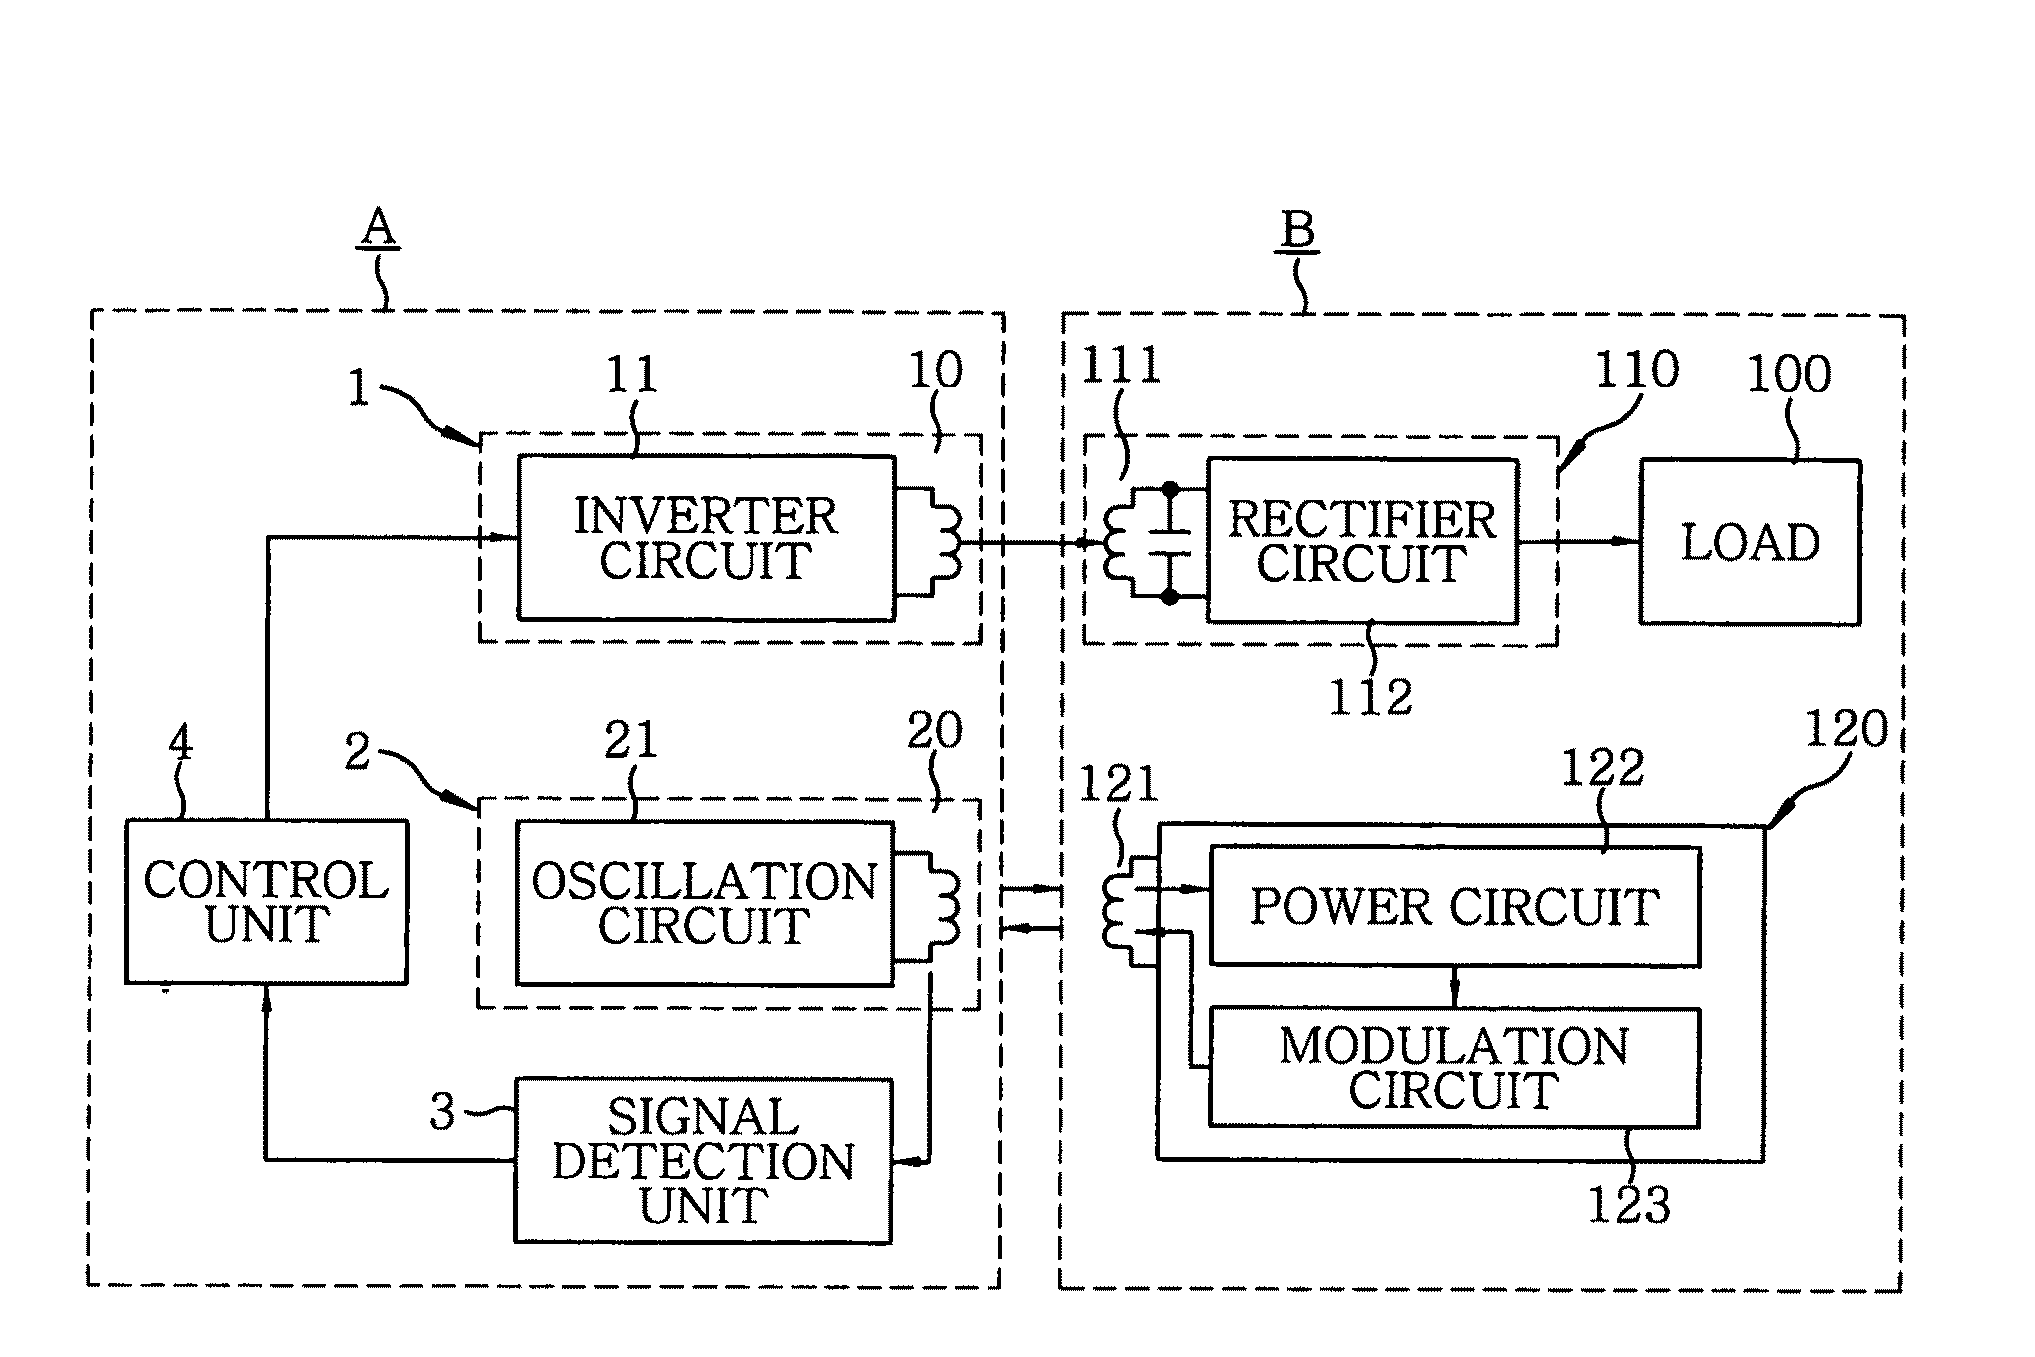 Non-contact power supply system